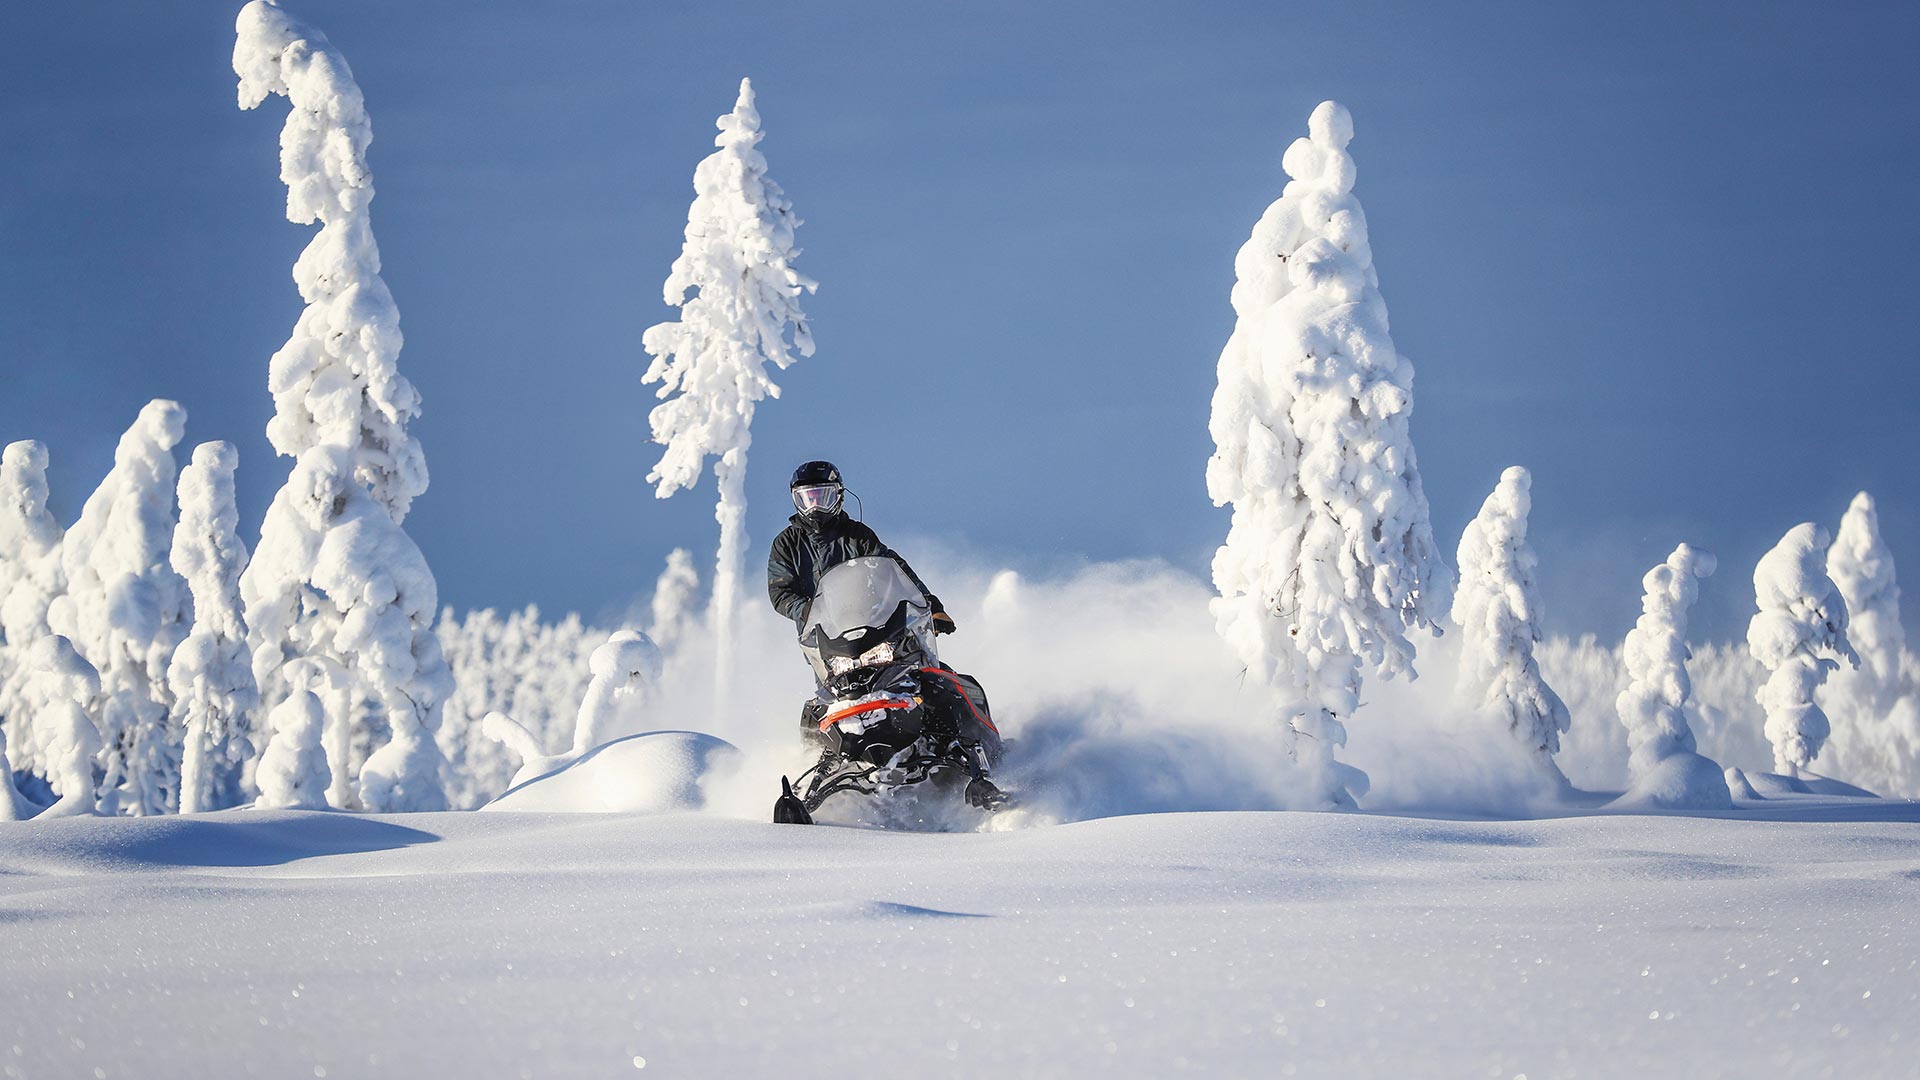 Lynx Commander snowmobile riding in snowy forest